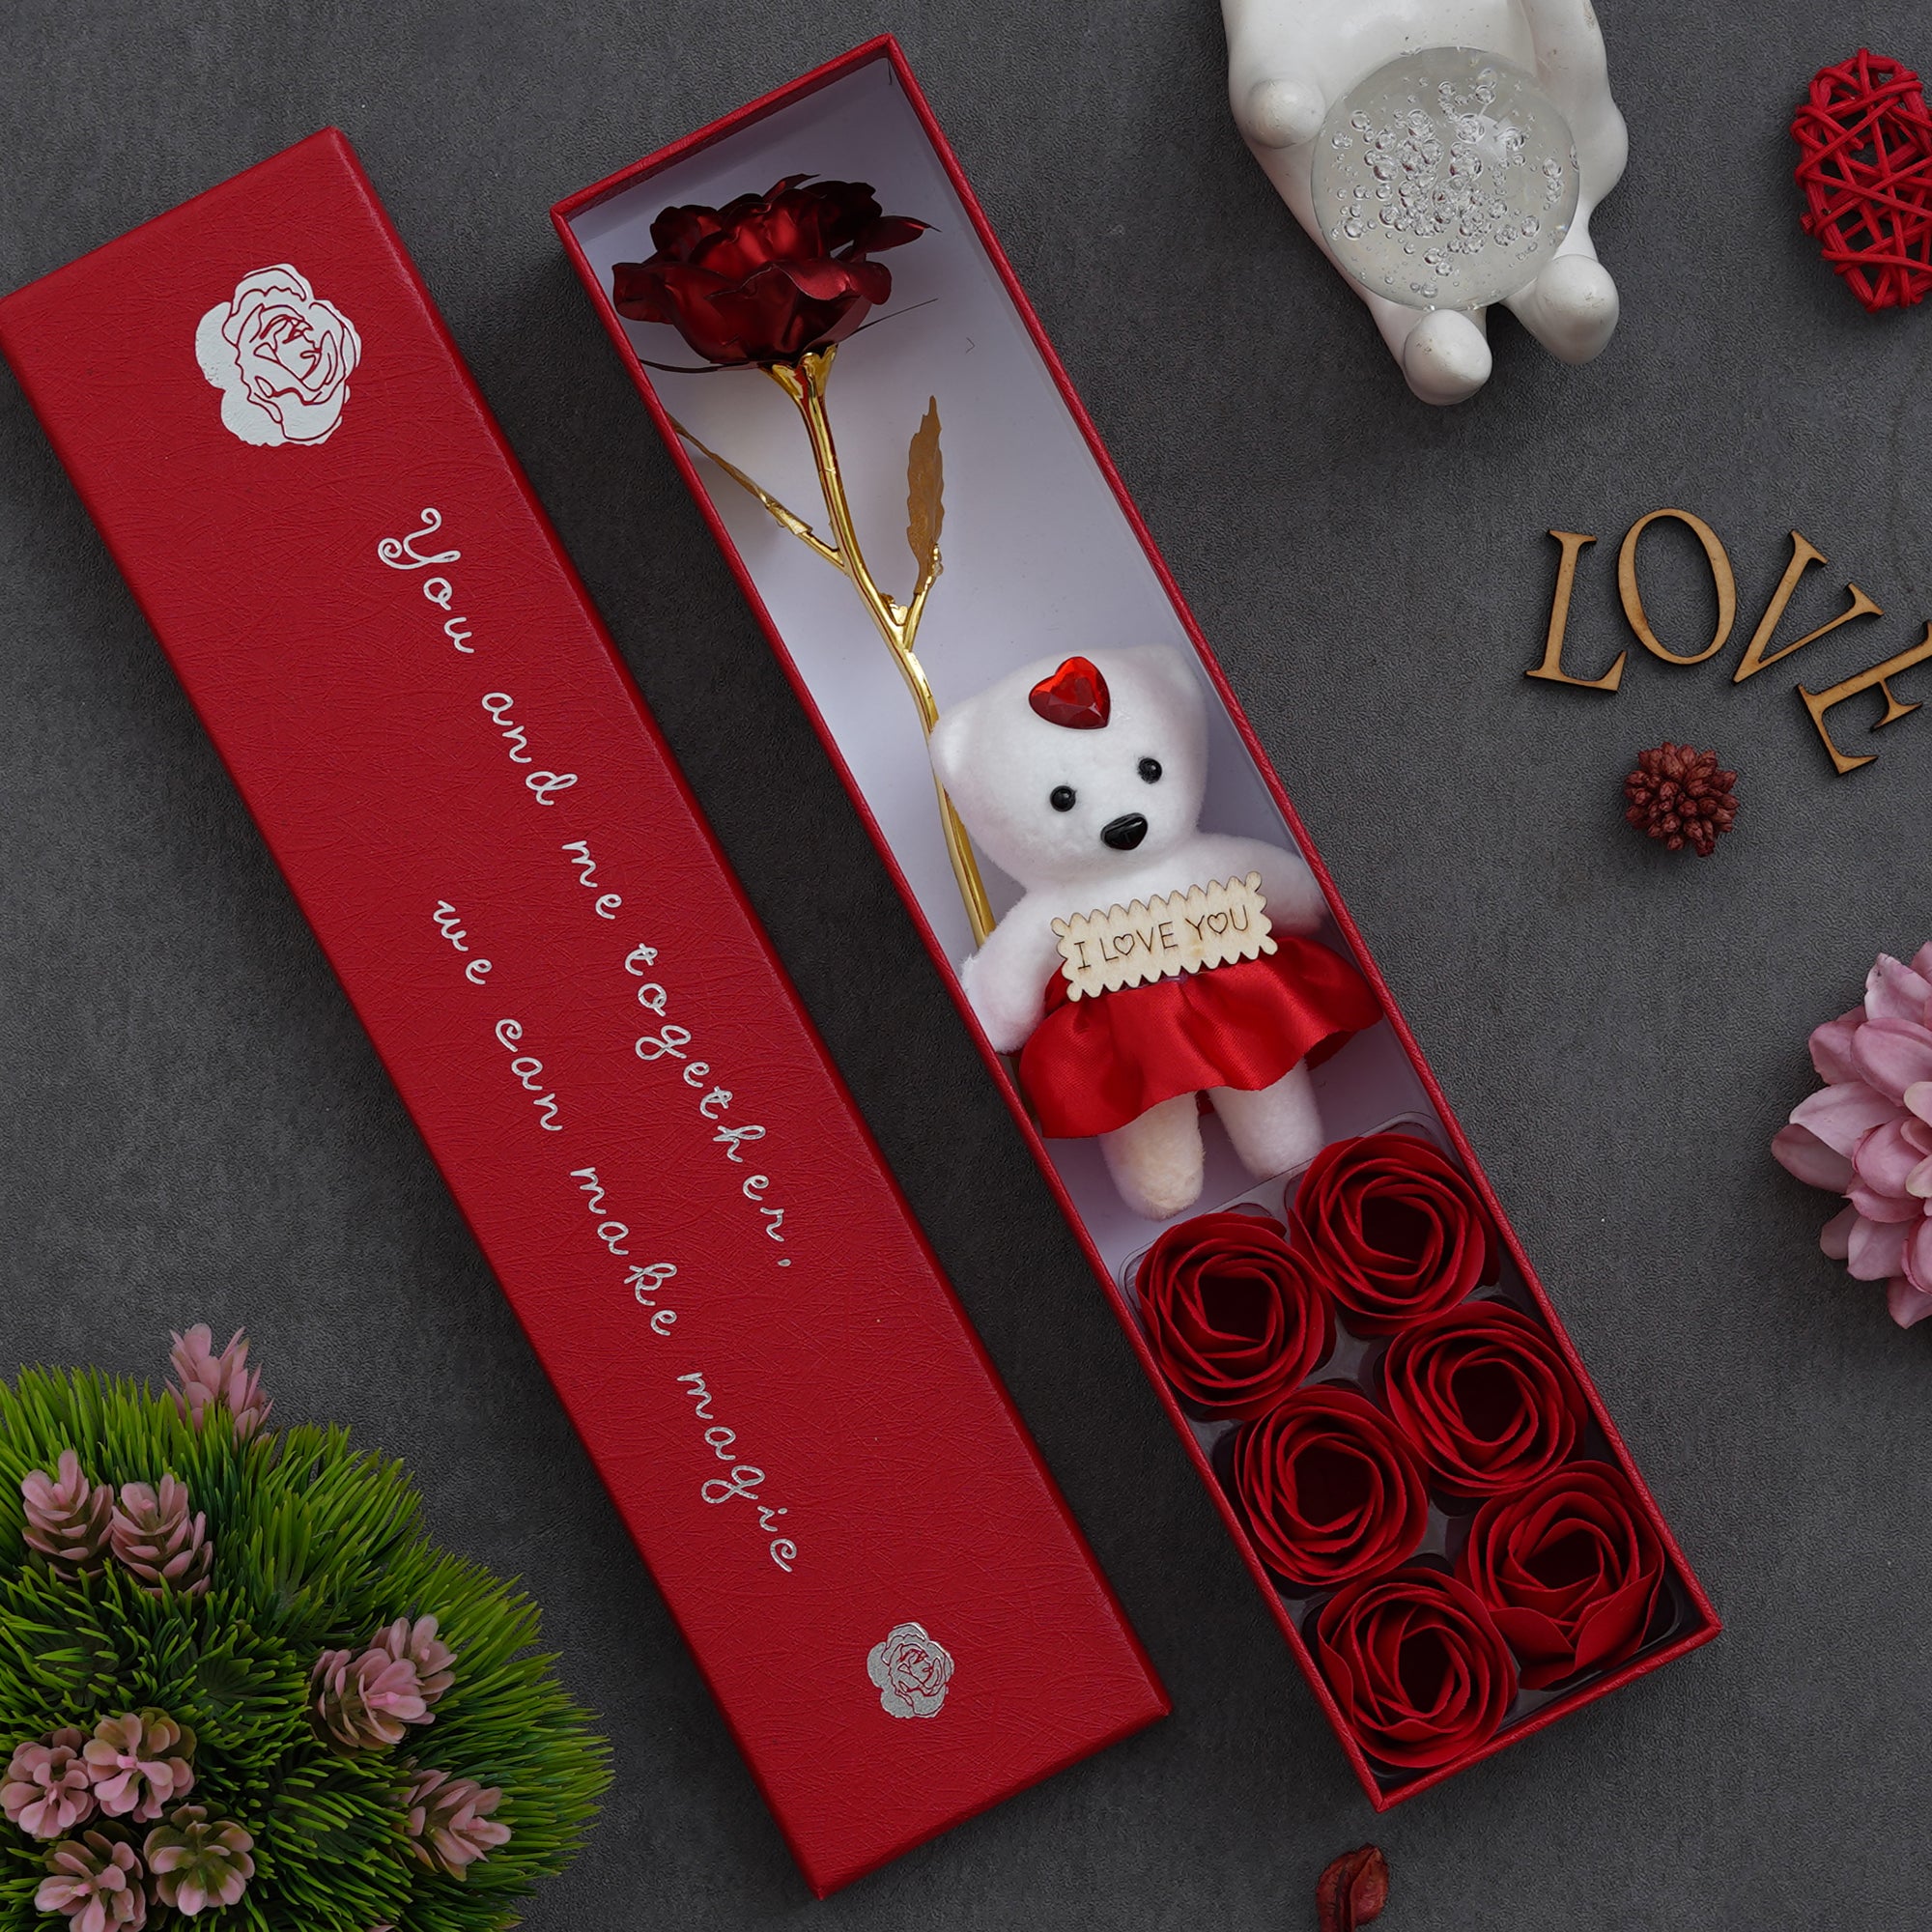 Valentine Combo of Pack of 8 Love Gift Cards, Red Gift Box with Teddy & Roses, Red Message Bottle Wooden Box Set 3